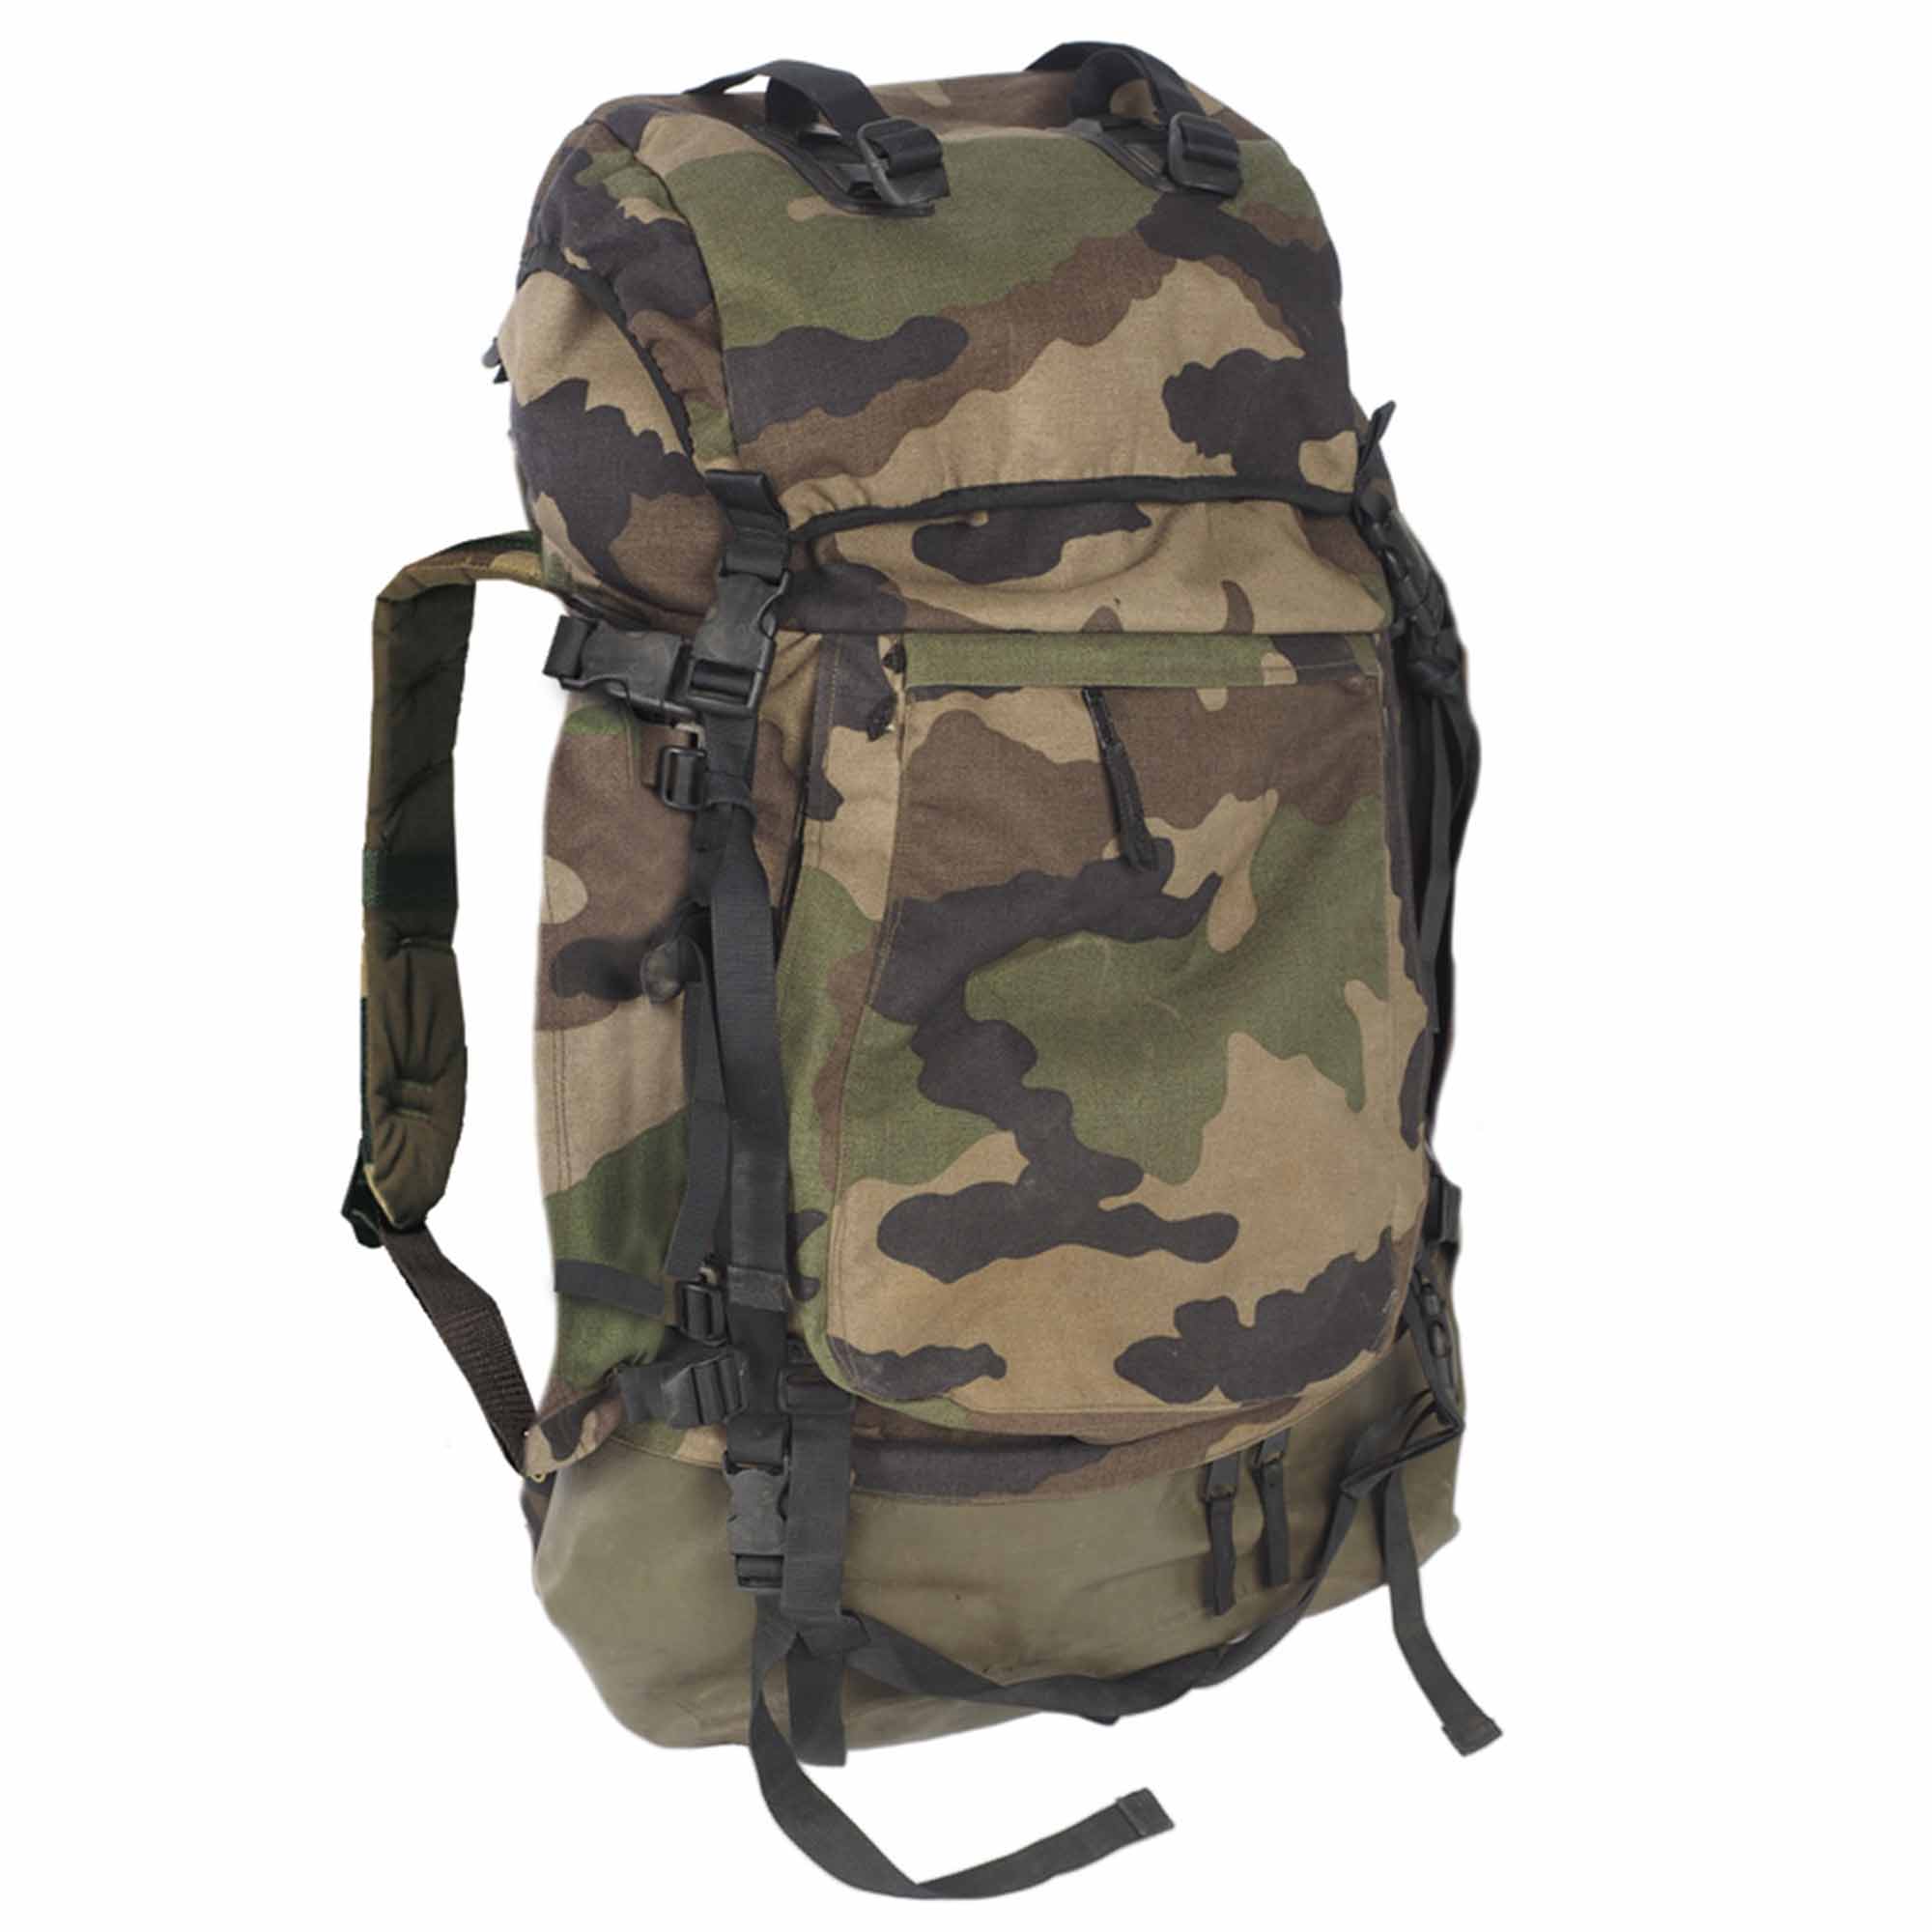 Looking for specific backpack- made in france- anyone have a